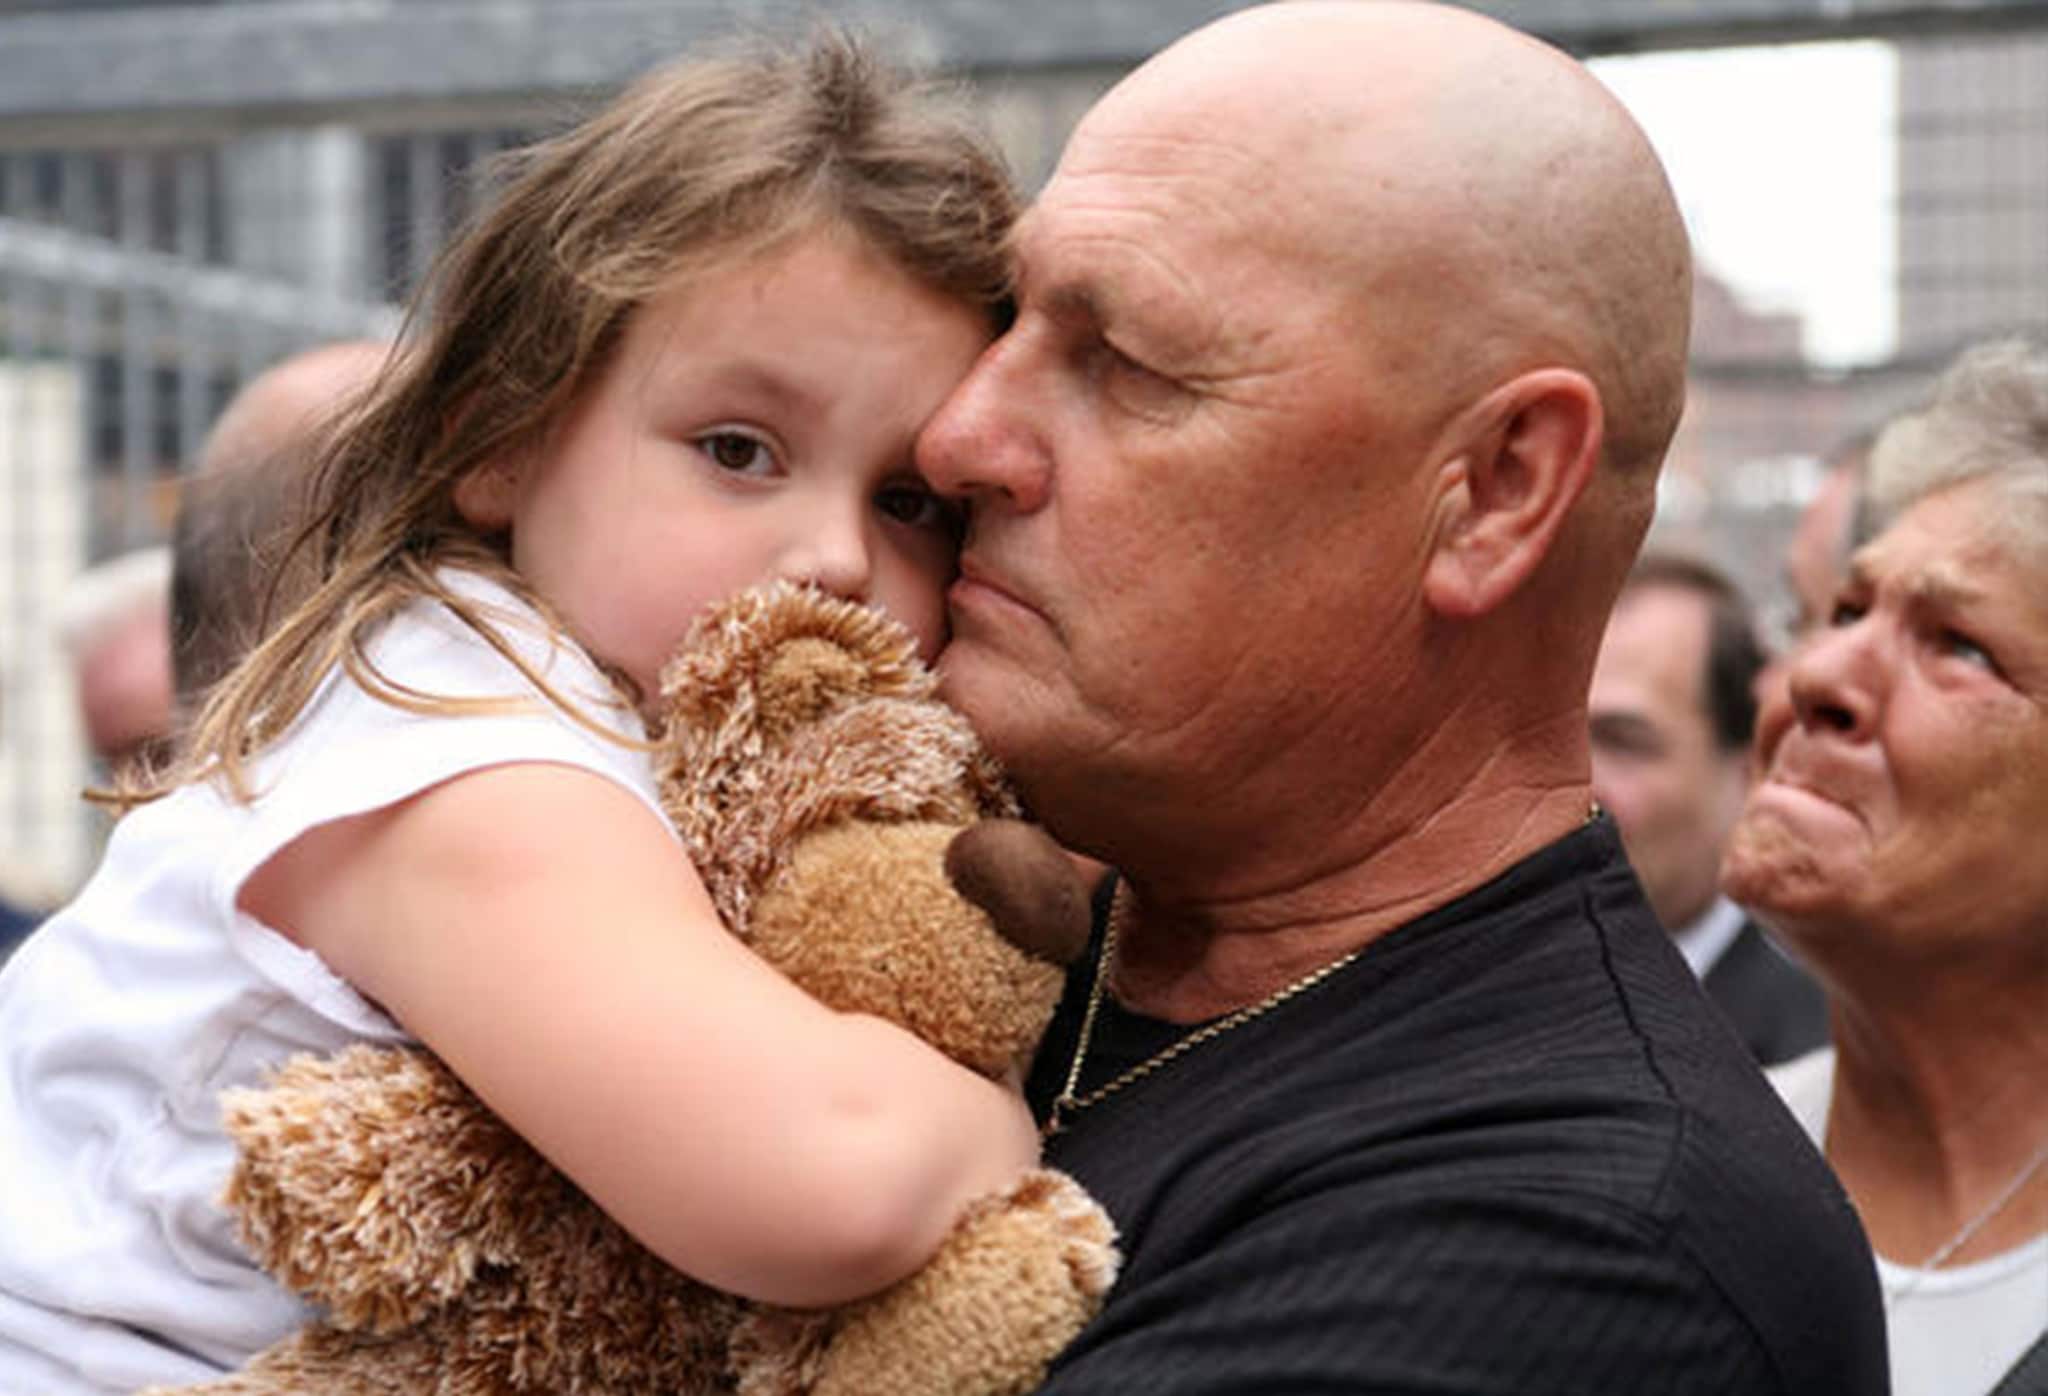 A man holding a young girl and stuffed animal at a rally.